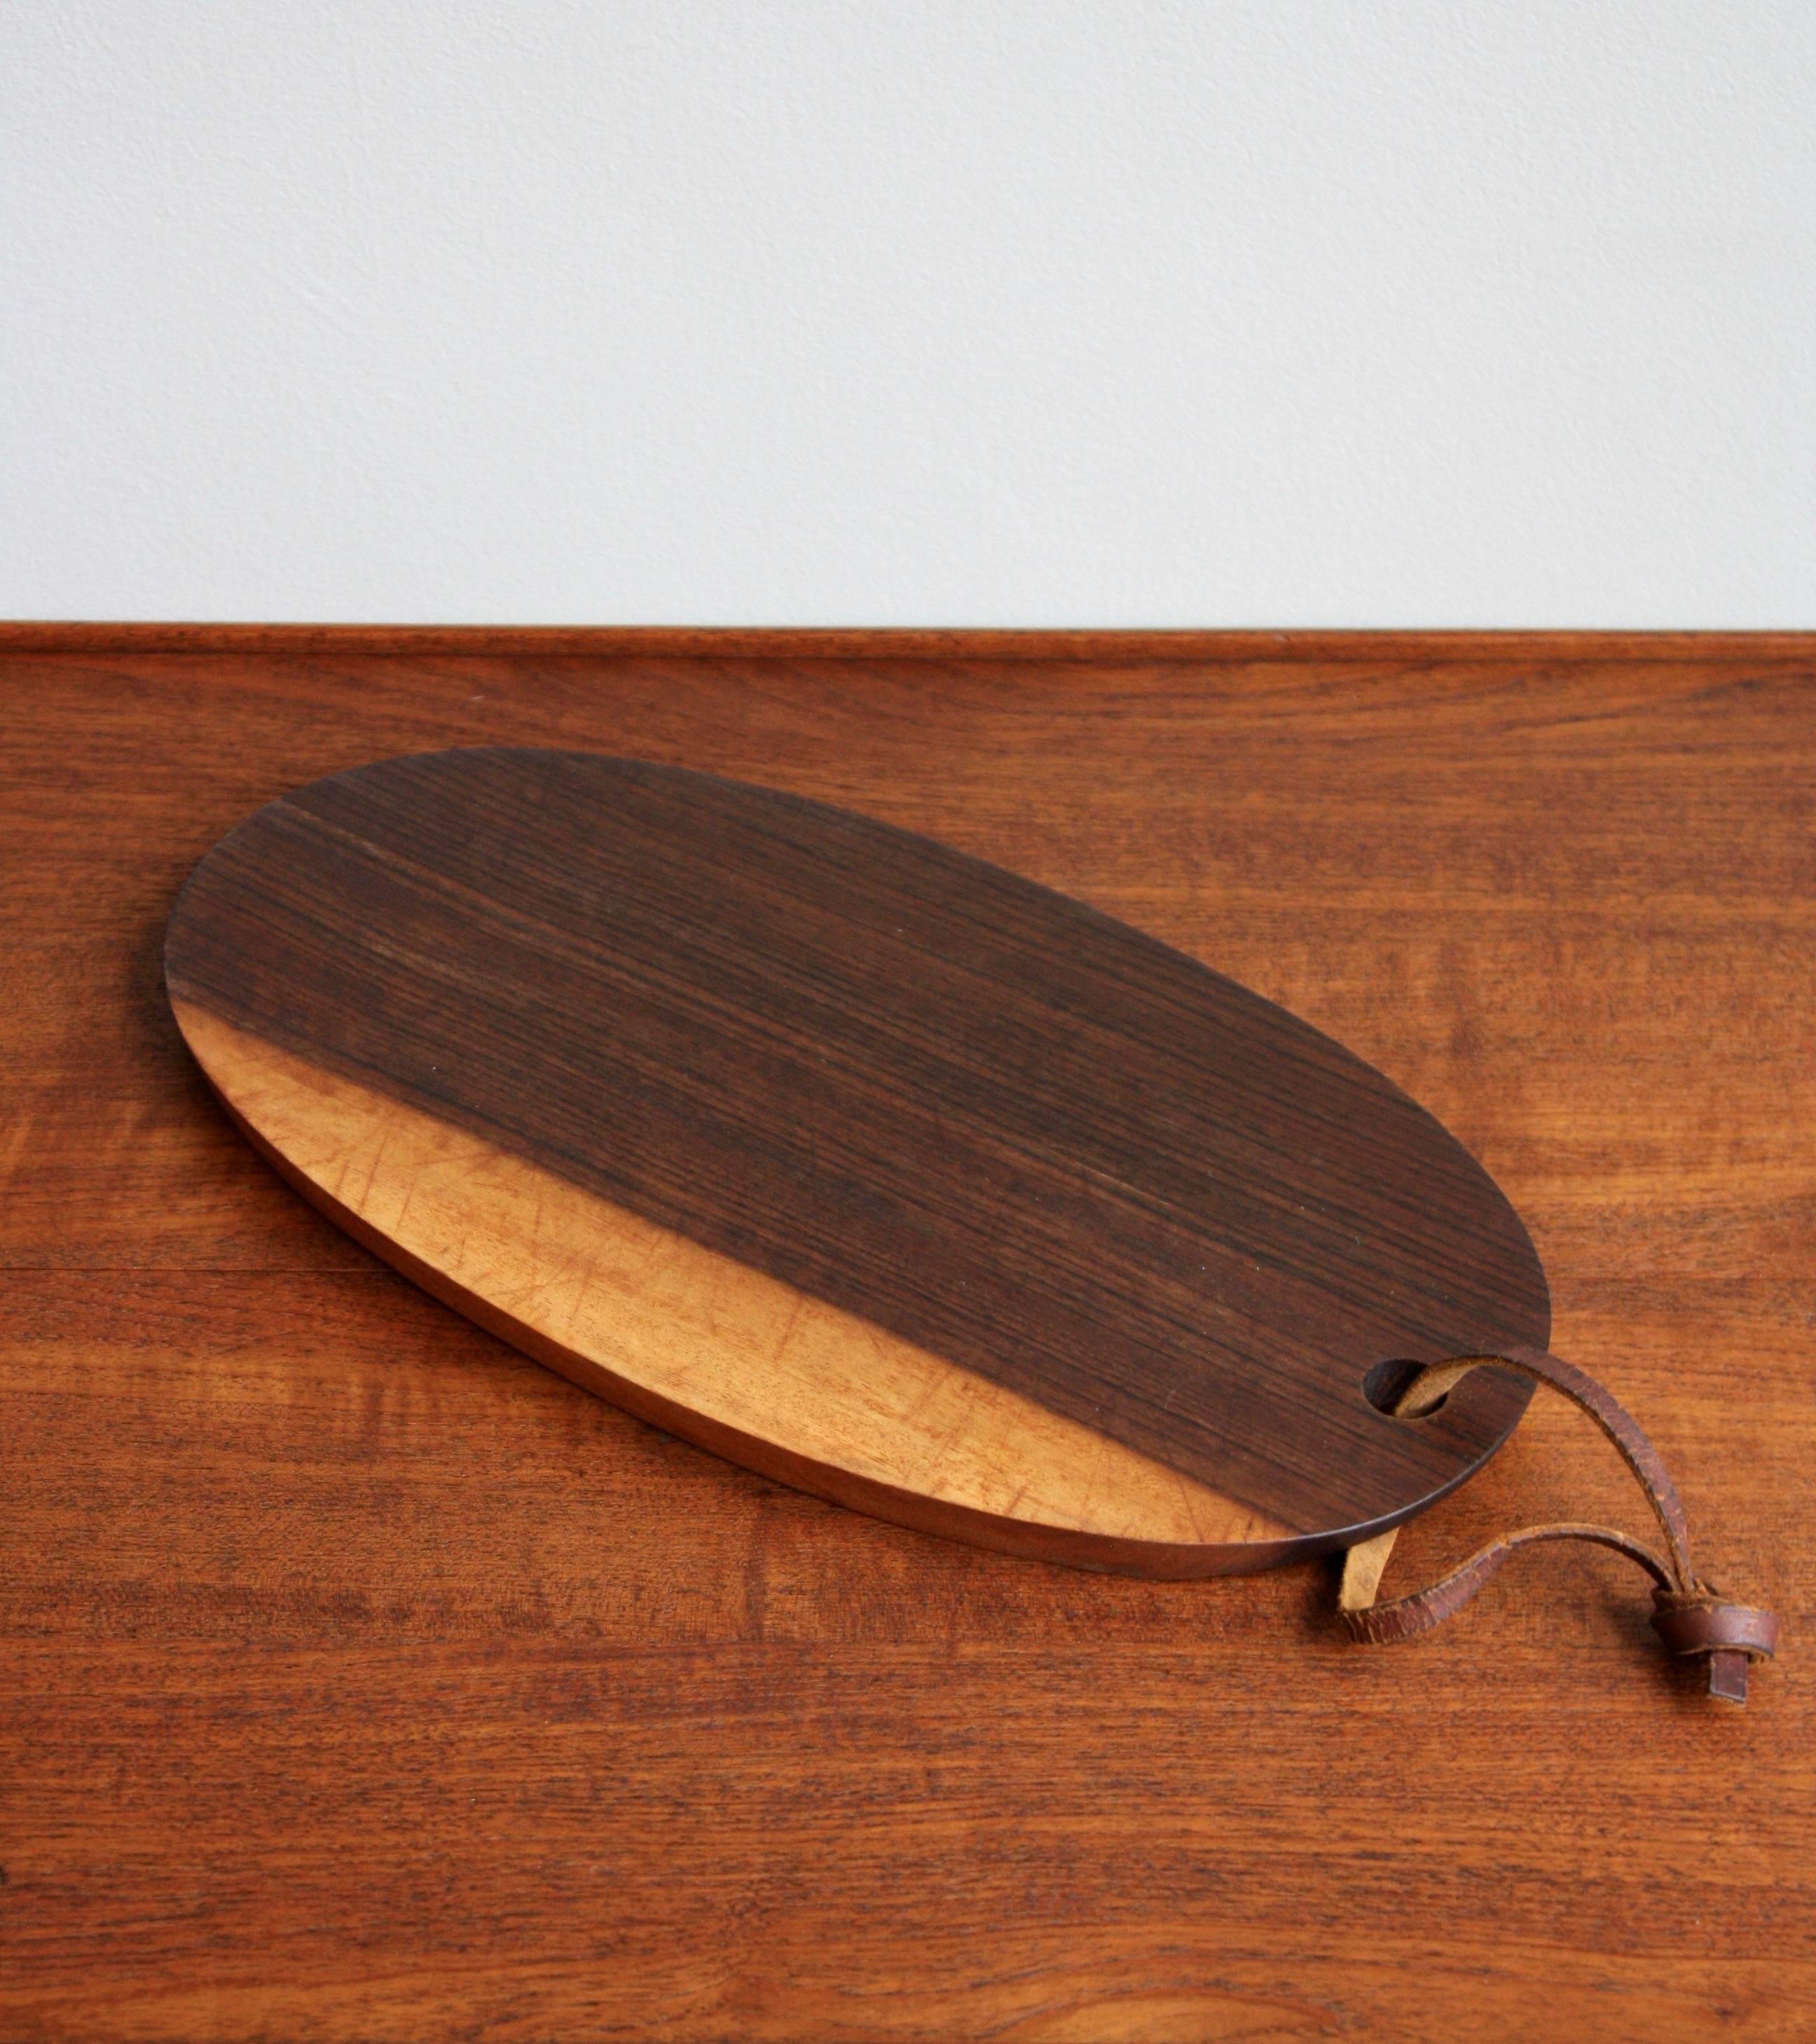 A vintage cutting board designed and made by Carl Auböck II. 
The elliptical shaped board is made from solid walnut. The ends of each side are geometrically chamfered to make it easier to grab and lift the board. 
At one end of the platter a